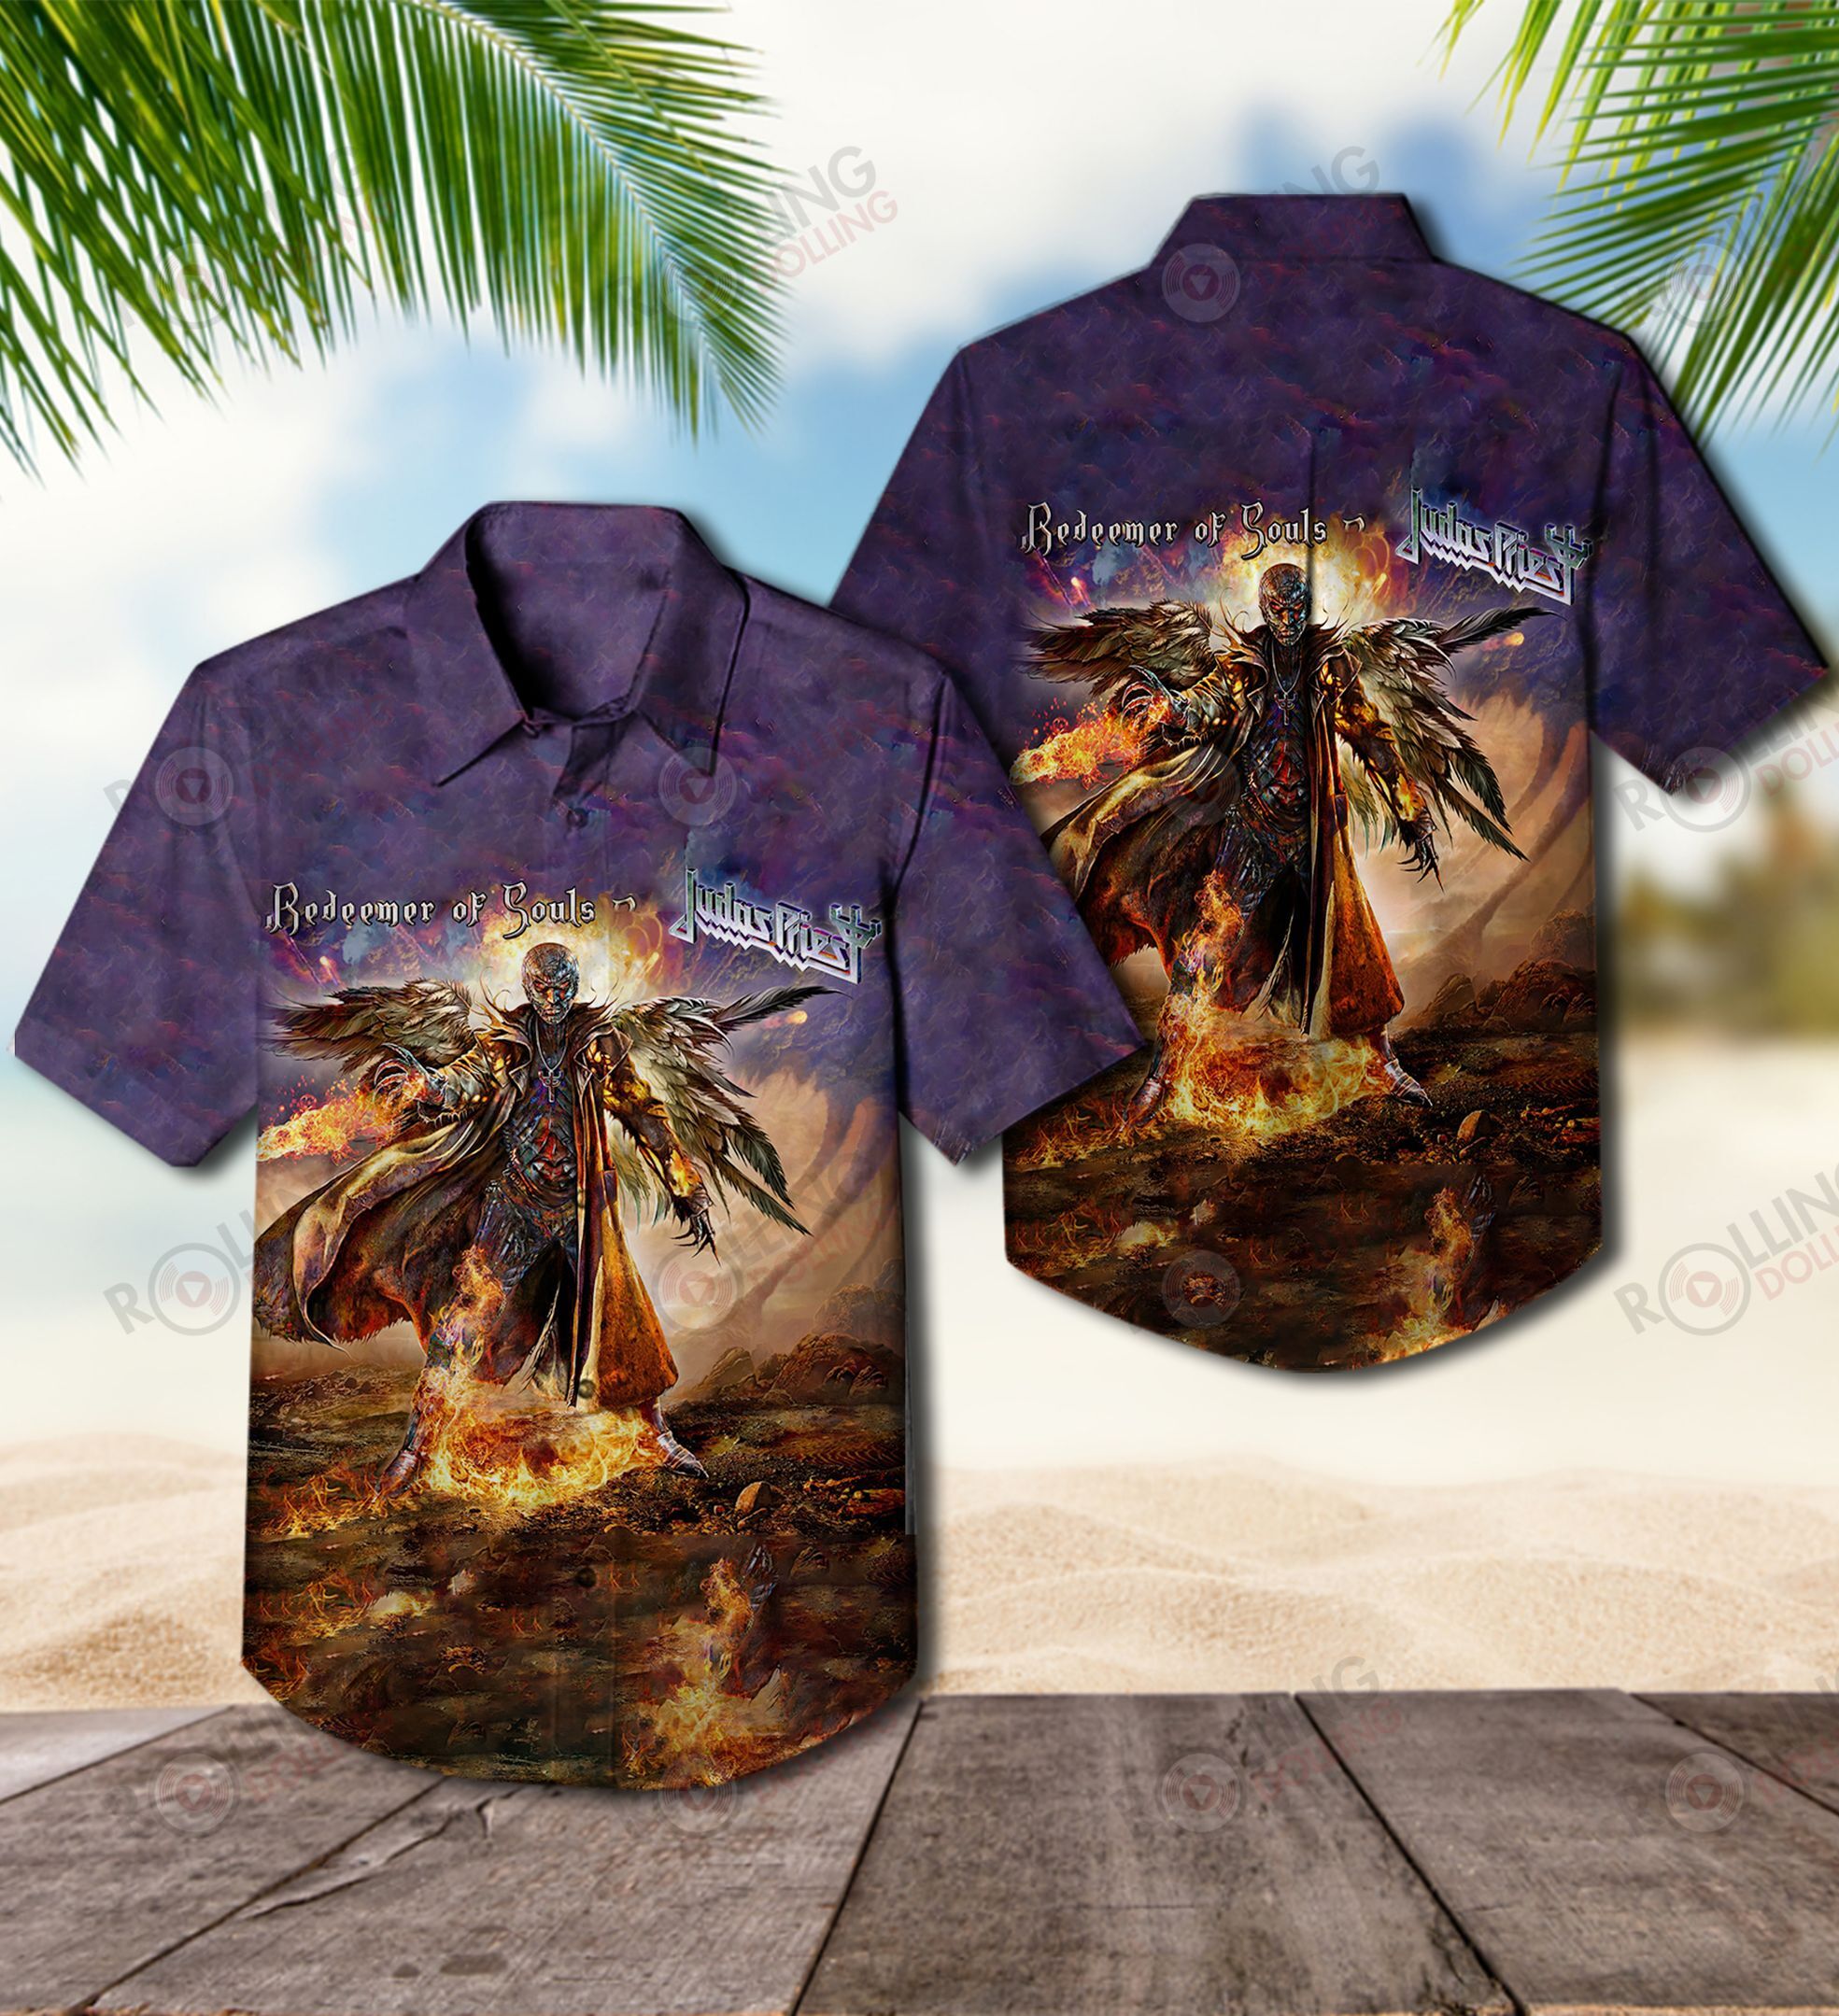 You'll have the perfect vacation outfit with this Hawaiian shirt 169